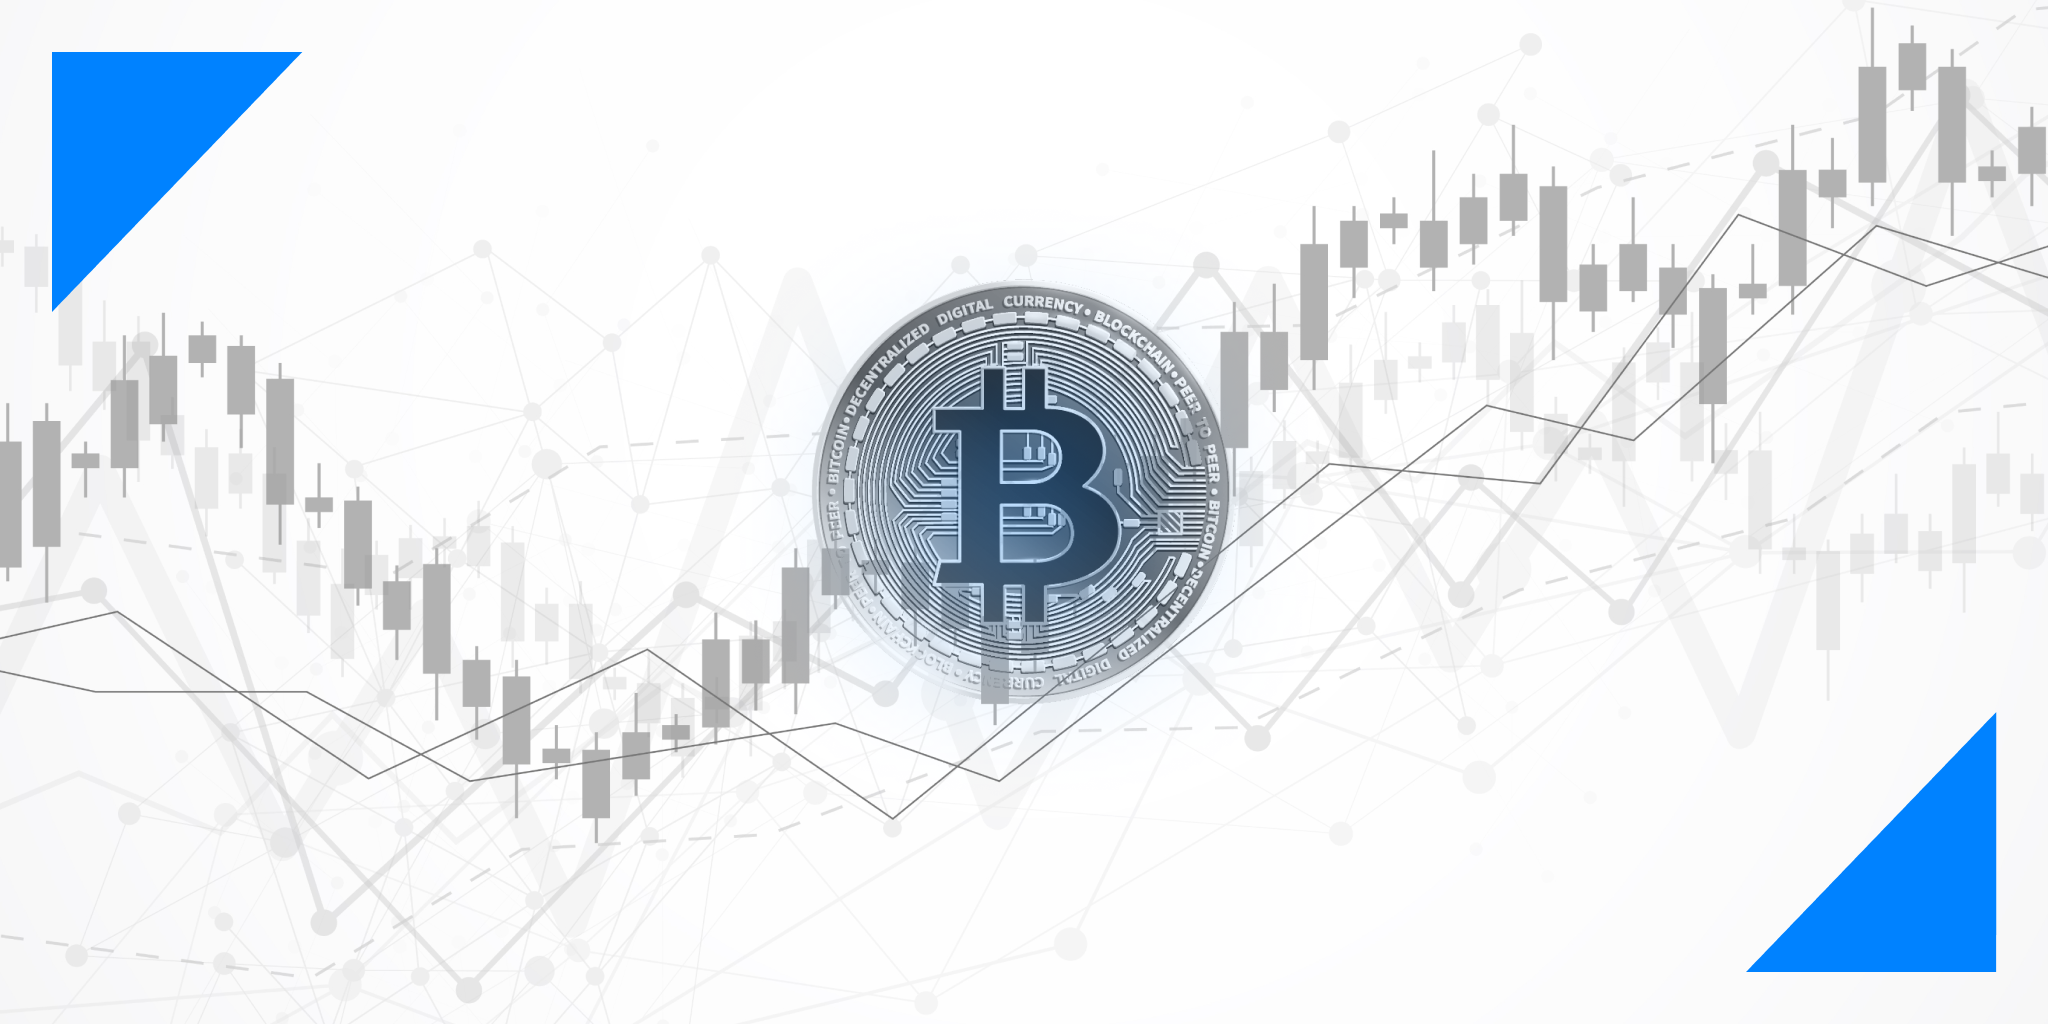 WallStreetBets: What are the effects on the BTC price?